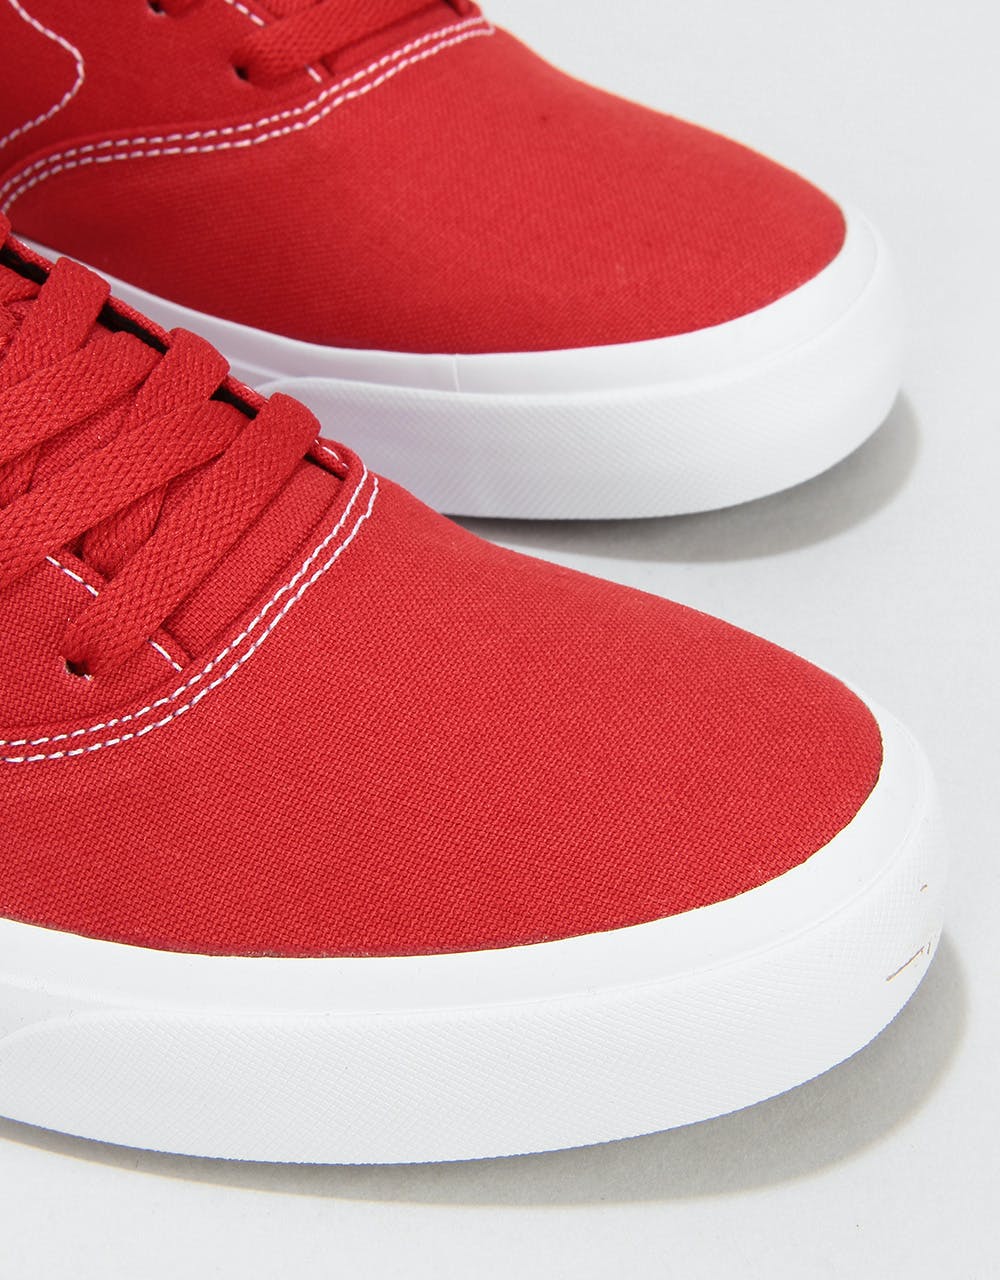 Nike SB Charge Solarsoft Canvas Skate Shoes - Mystic Red/White-Black